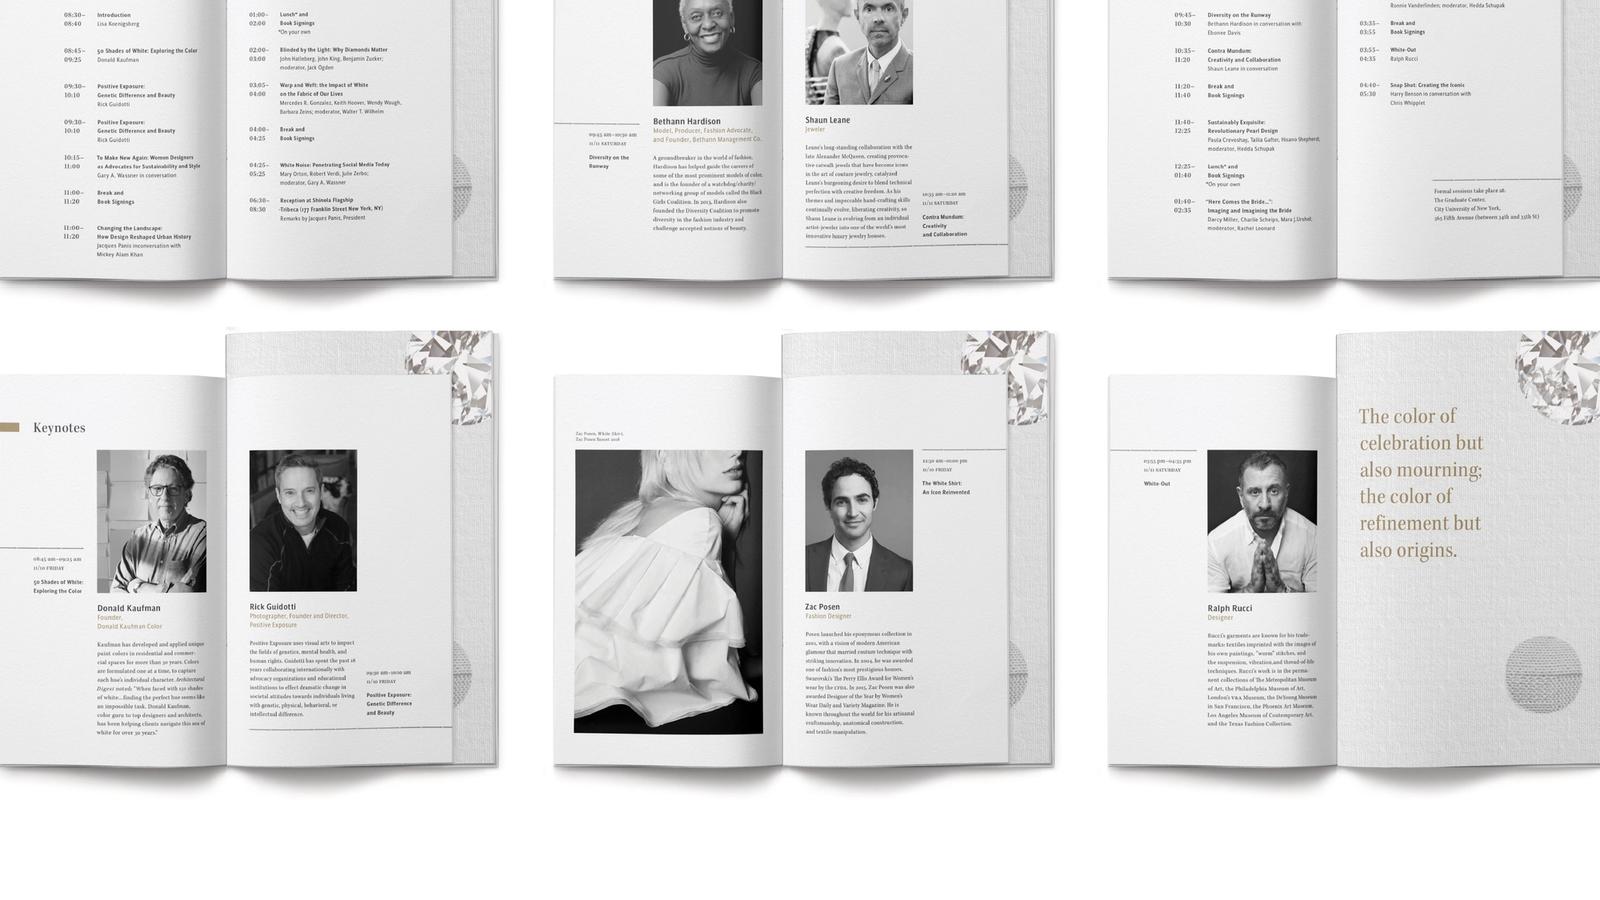 White Fashion & Jewelry // conference materials